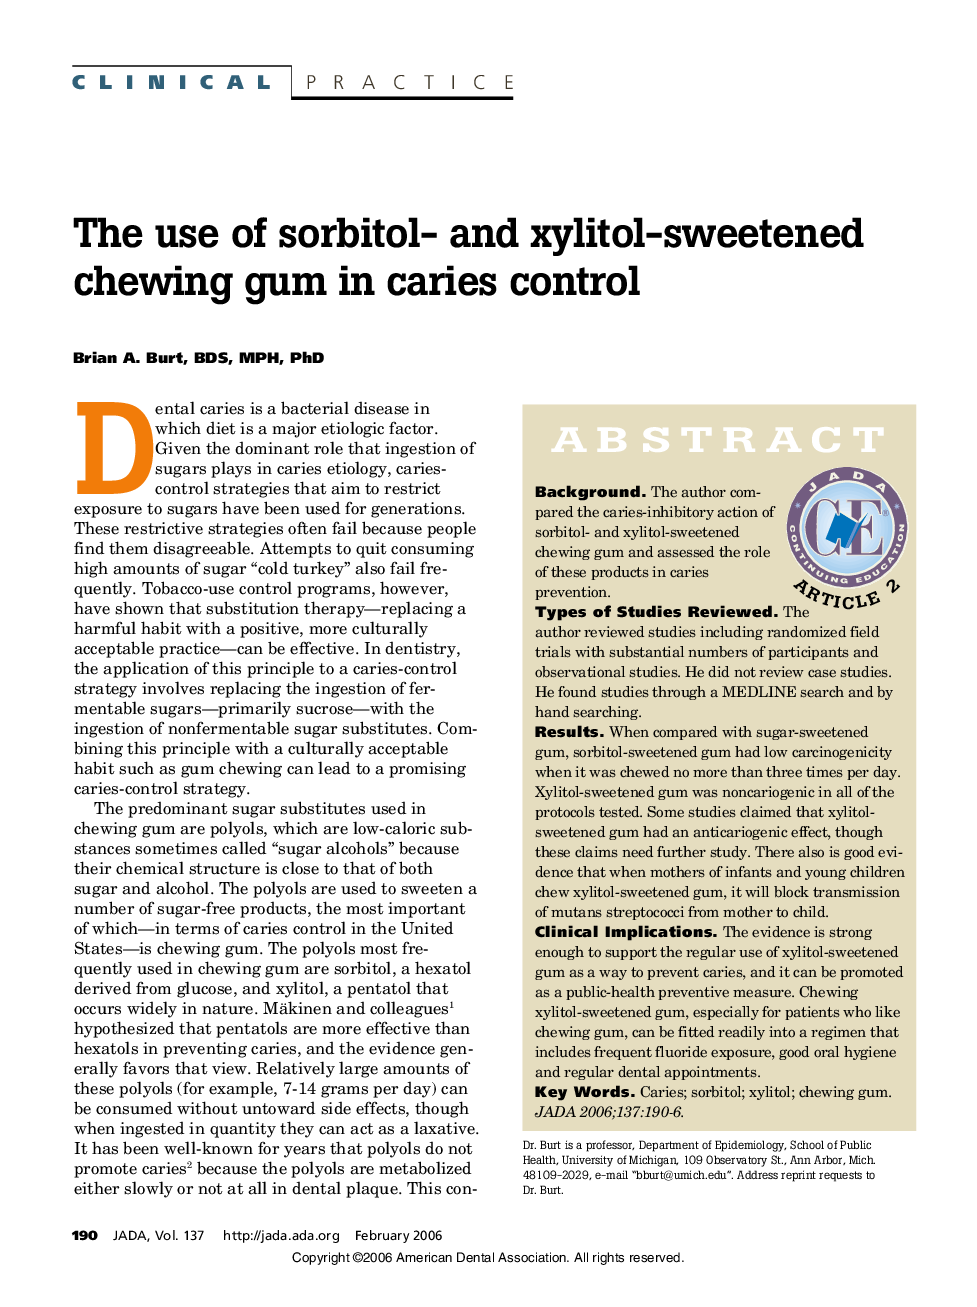 The use of sorbitol- and xylitol-sweetened chewing gum in caries control 